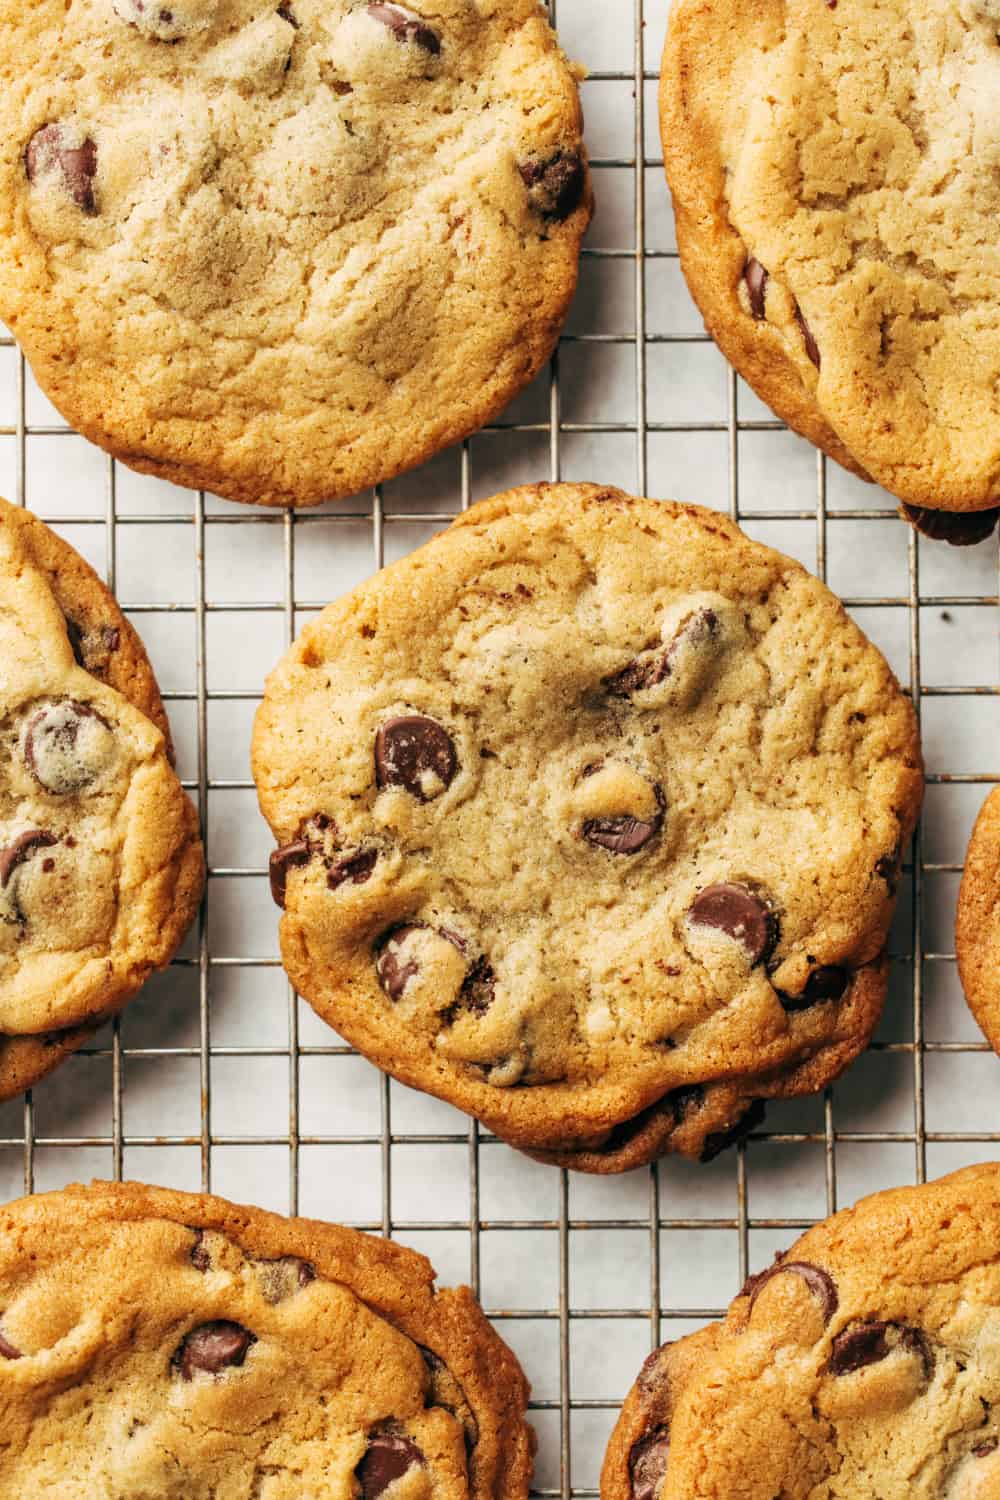 The best, chewiest chocolate chip cookies come from the New York Times chocolate chip cookie recipe. 